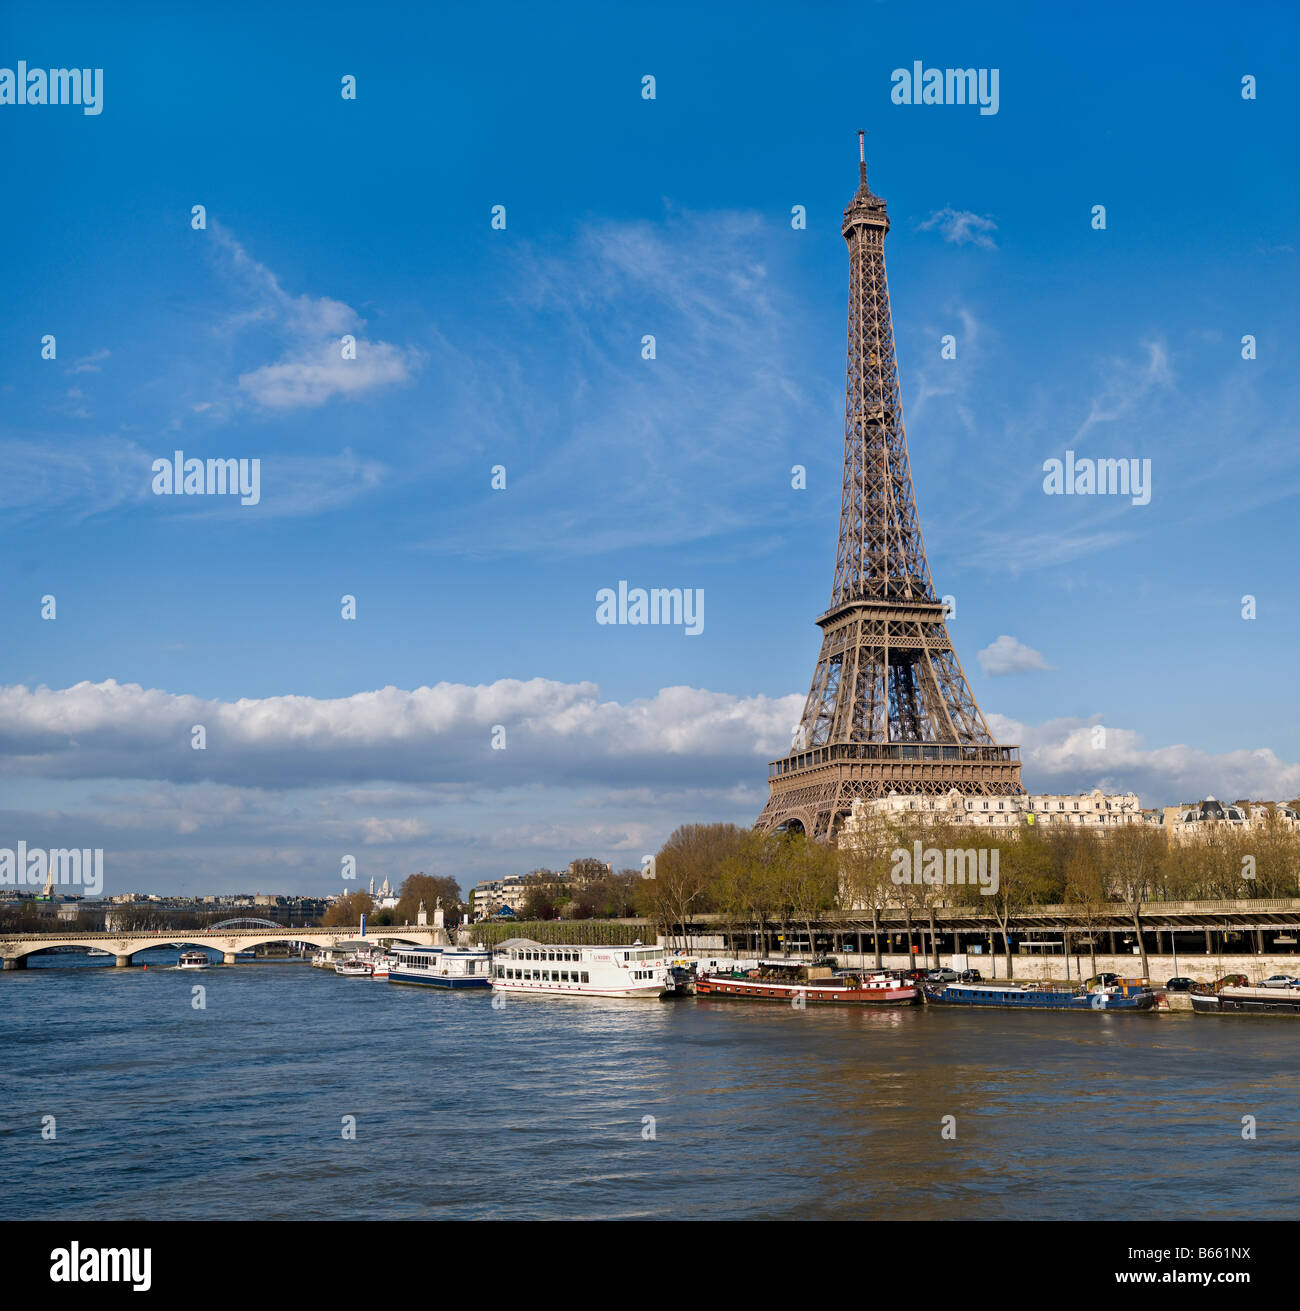 Eiffel Tower with blue skies and boats on the Seine River by Charles W. Lupica Stock Photo